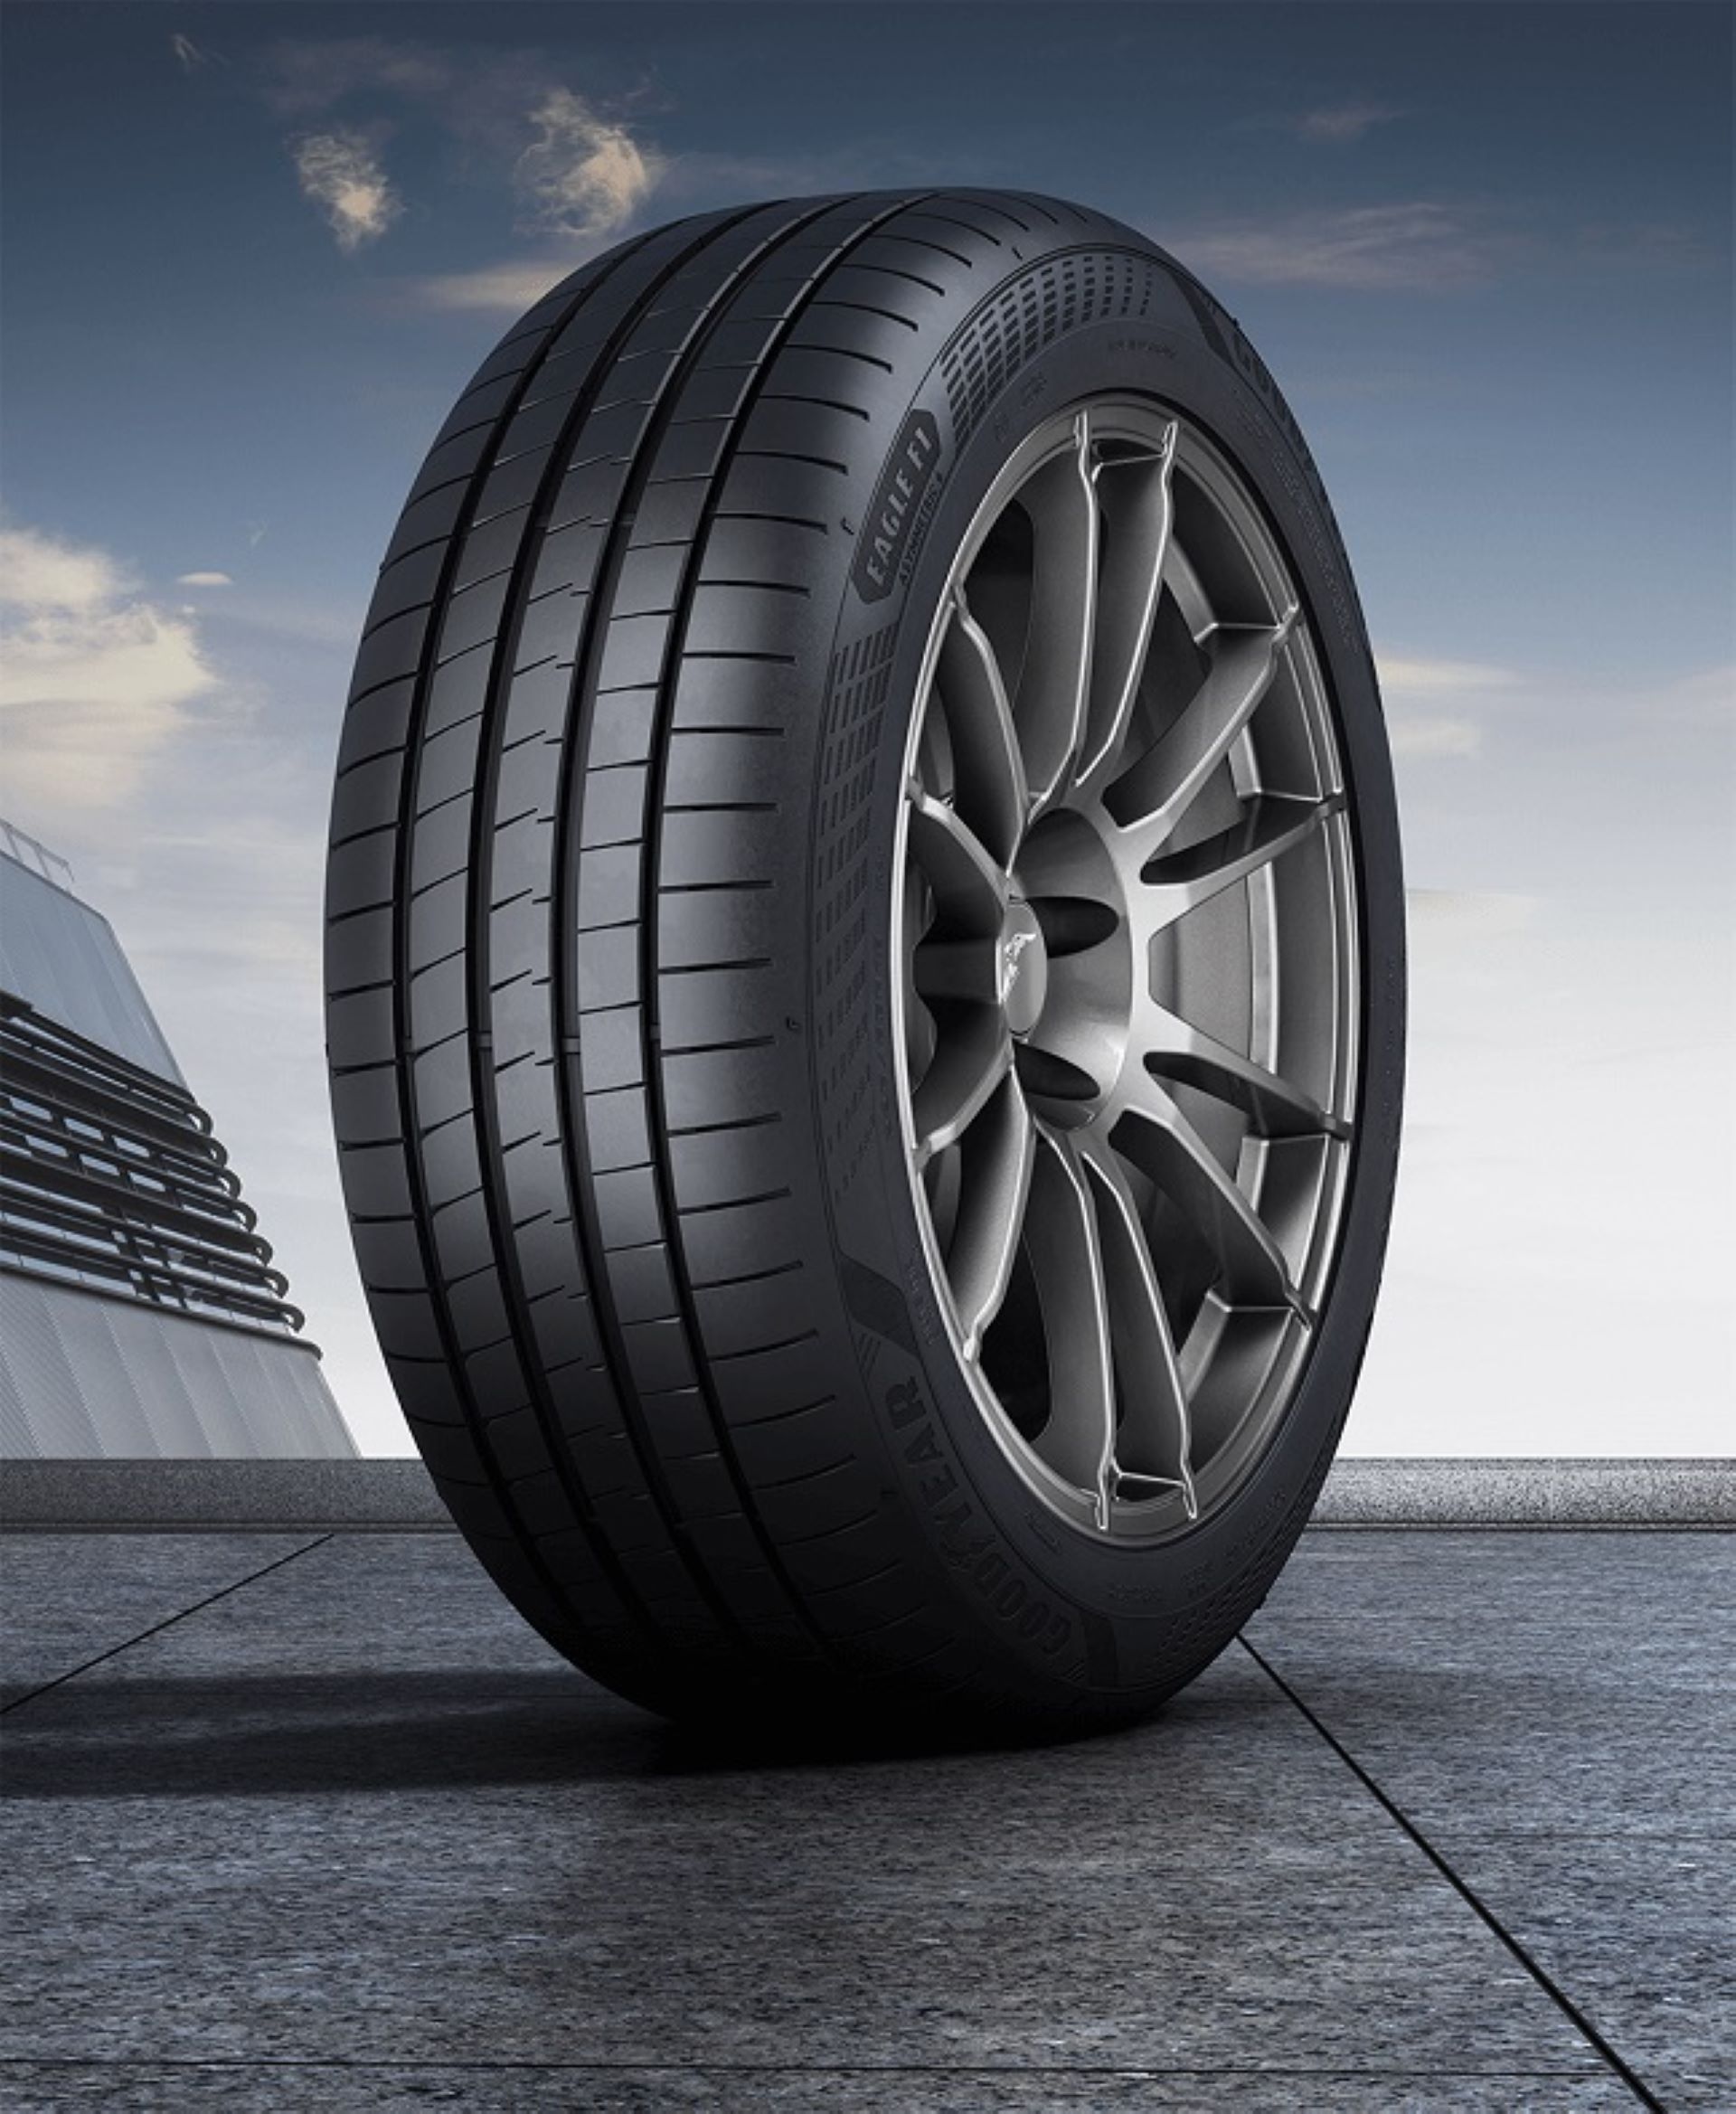 ‘Tyres are not a commodity’: Goodyear addresses drivers’ informed purchase decisions